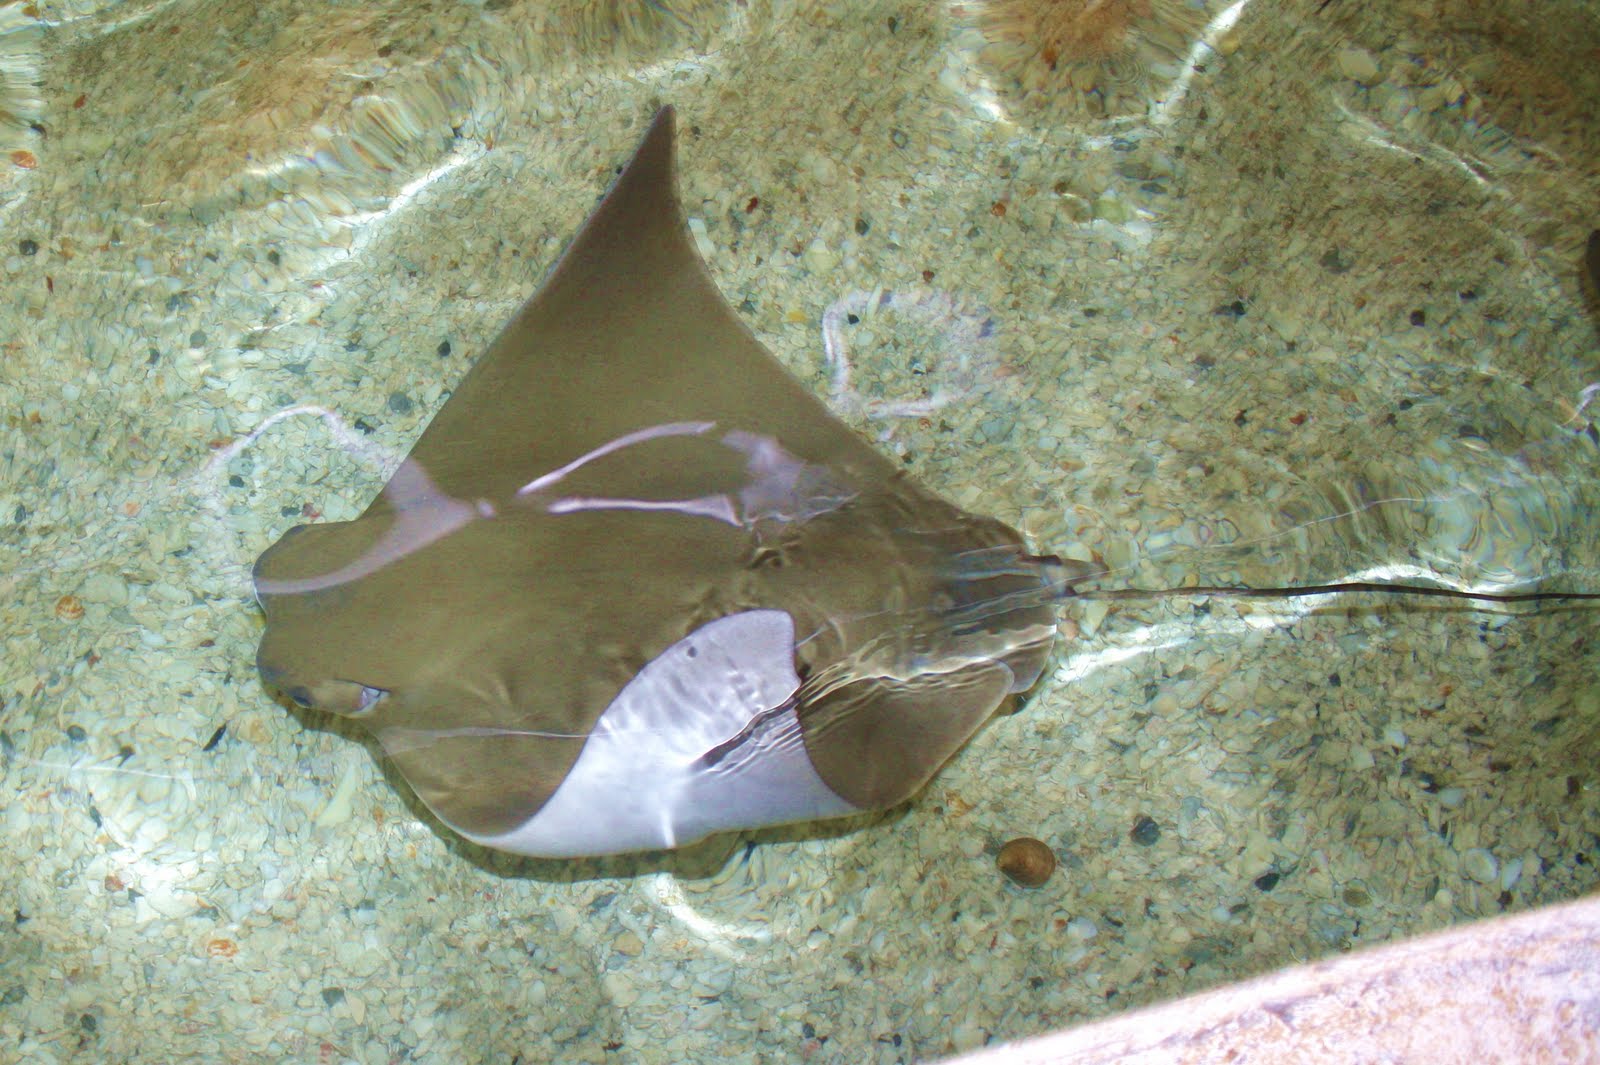 Reflections of the Rasmussens: Stingray Fun at Caribbean Cove!